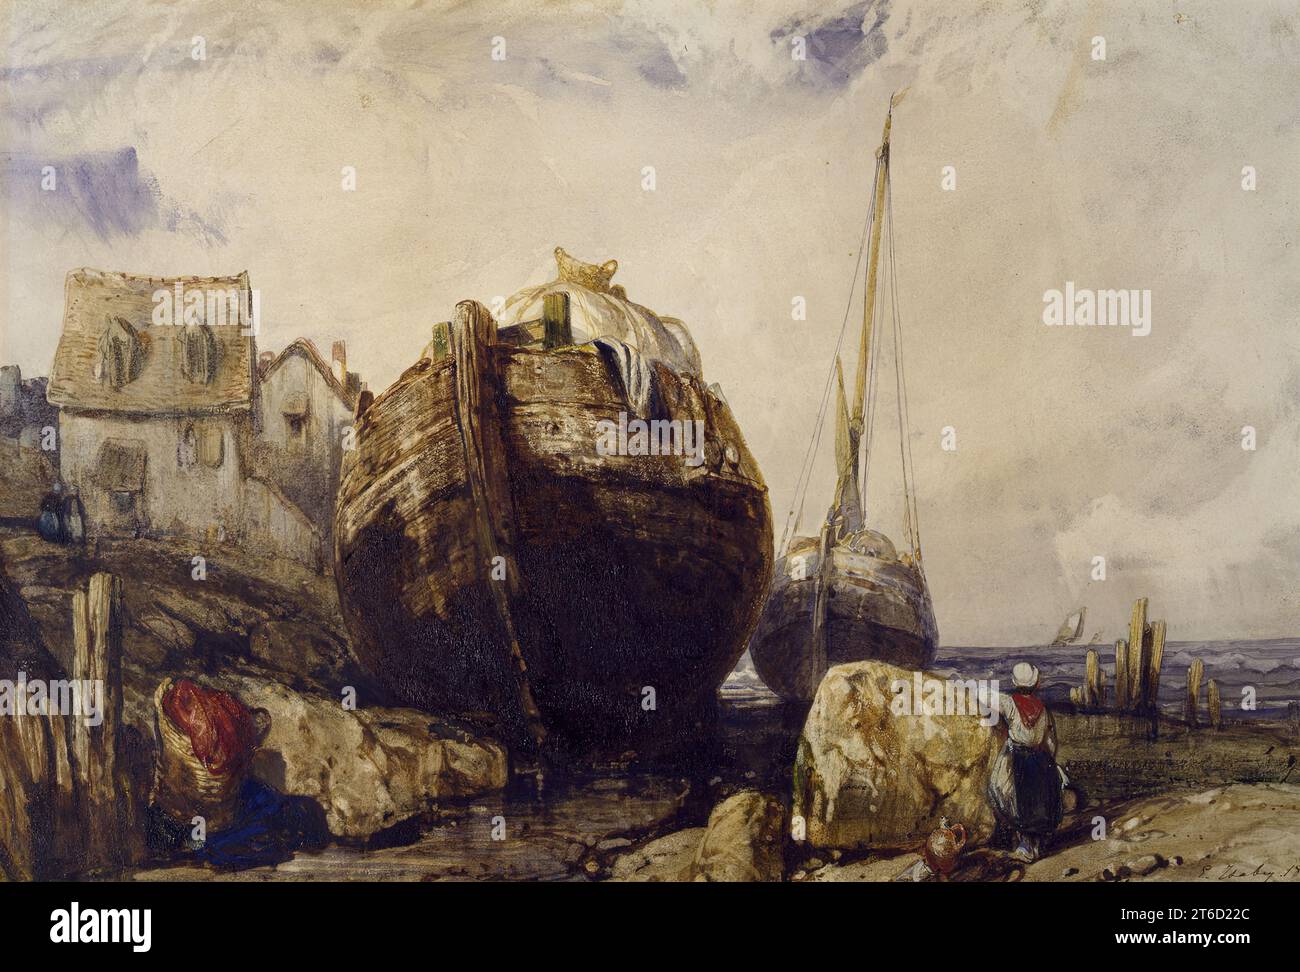 Fishing Boats, 1836. Eug&#xe8;ne Isabey began his career assisting his father, the miniaturist J. B. Isabey, with illustrations for a travel book on Italy. In 1825, Isabey made a trip to England, where he was profoundly influenced by the latest trends in watercolour painting. On his return, he specialized in coastal scenes of Normandy in the north of France. Here, Isabey depicts the luminous atmospheric effects at the meeting of sea, shore, and sky with the consummate skill that earned him a reputation as one of the leading Romantic watercolourists. Stock Photo